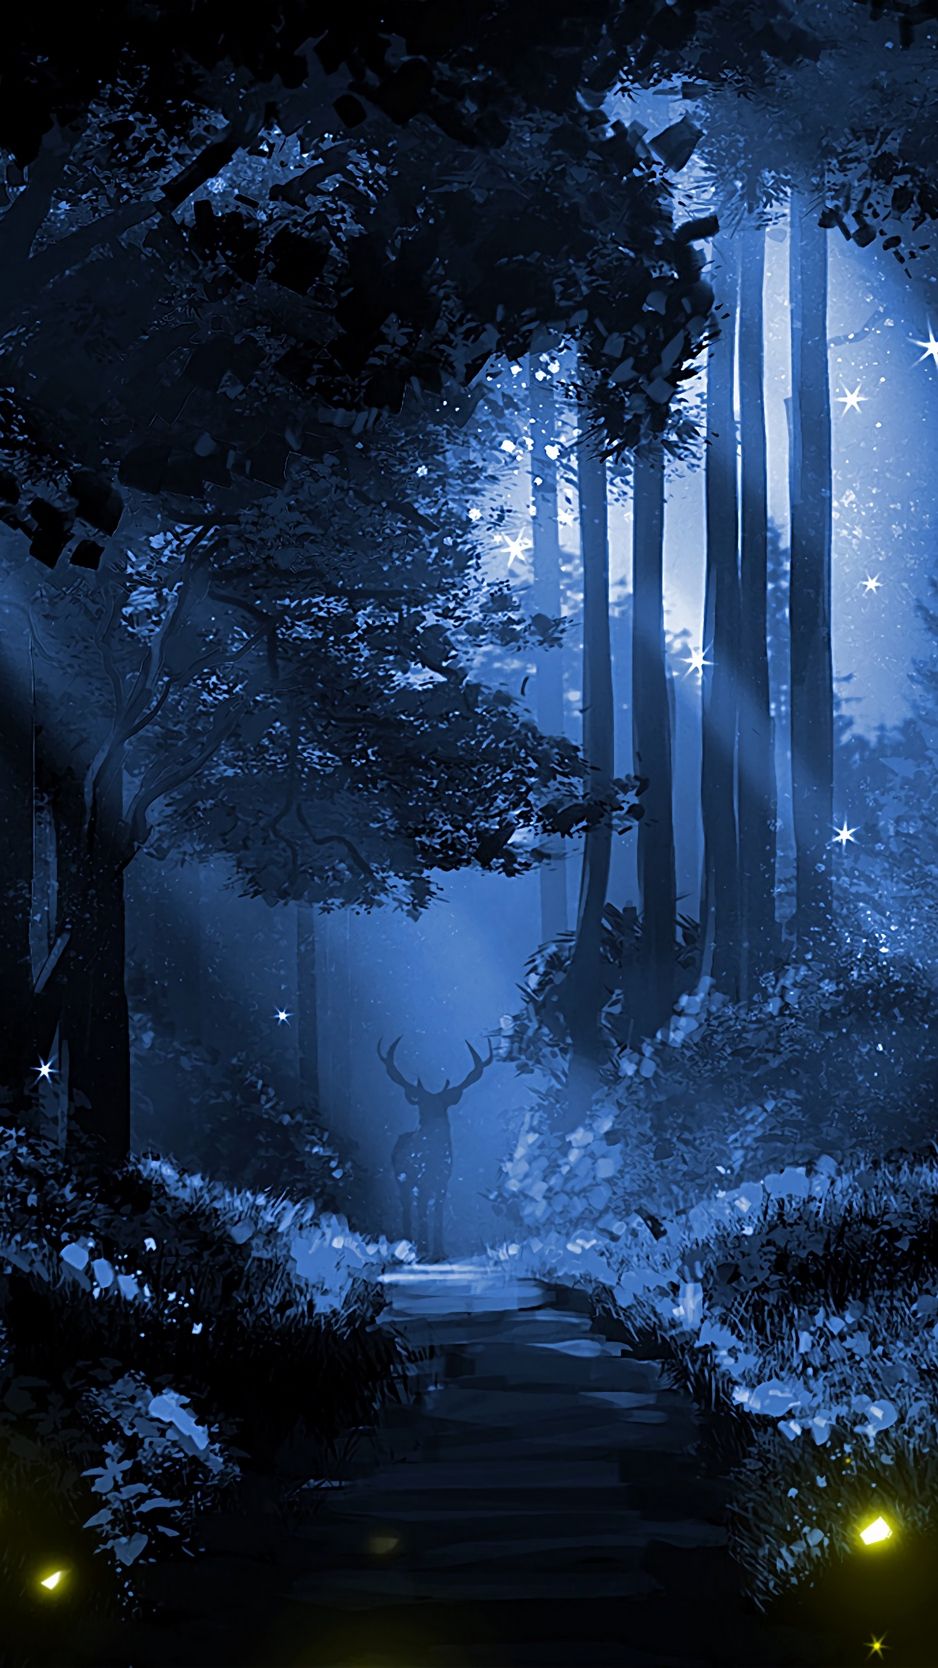 Night Forest Wallpaper On